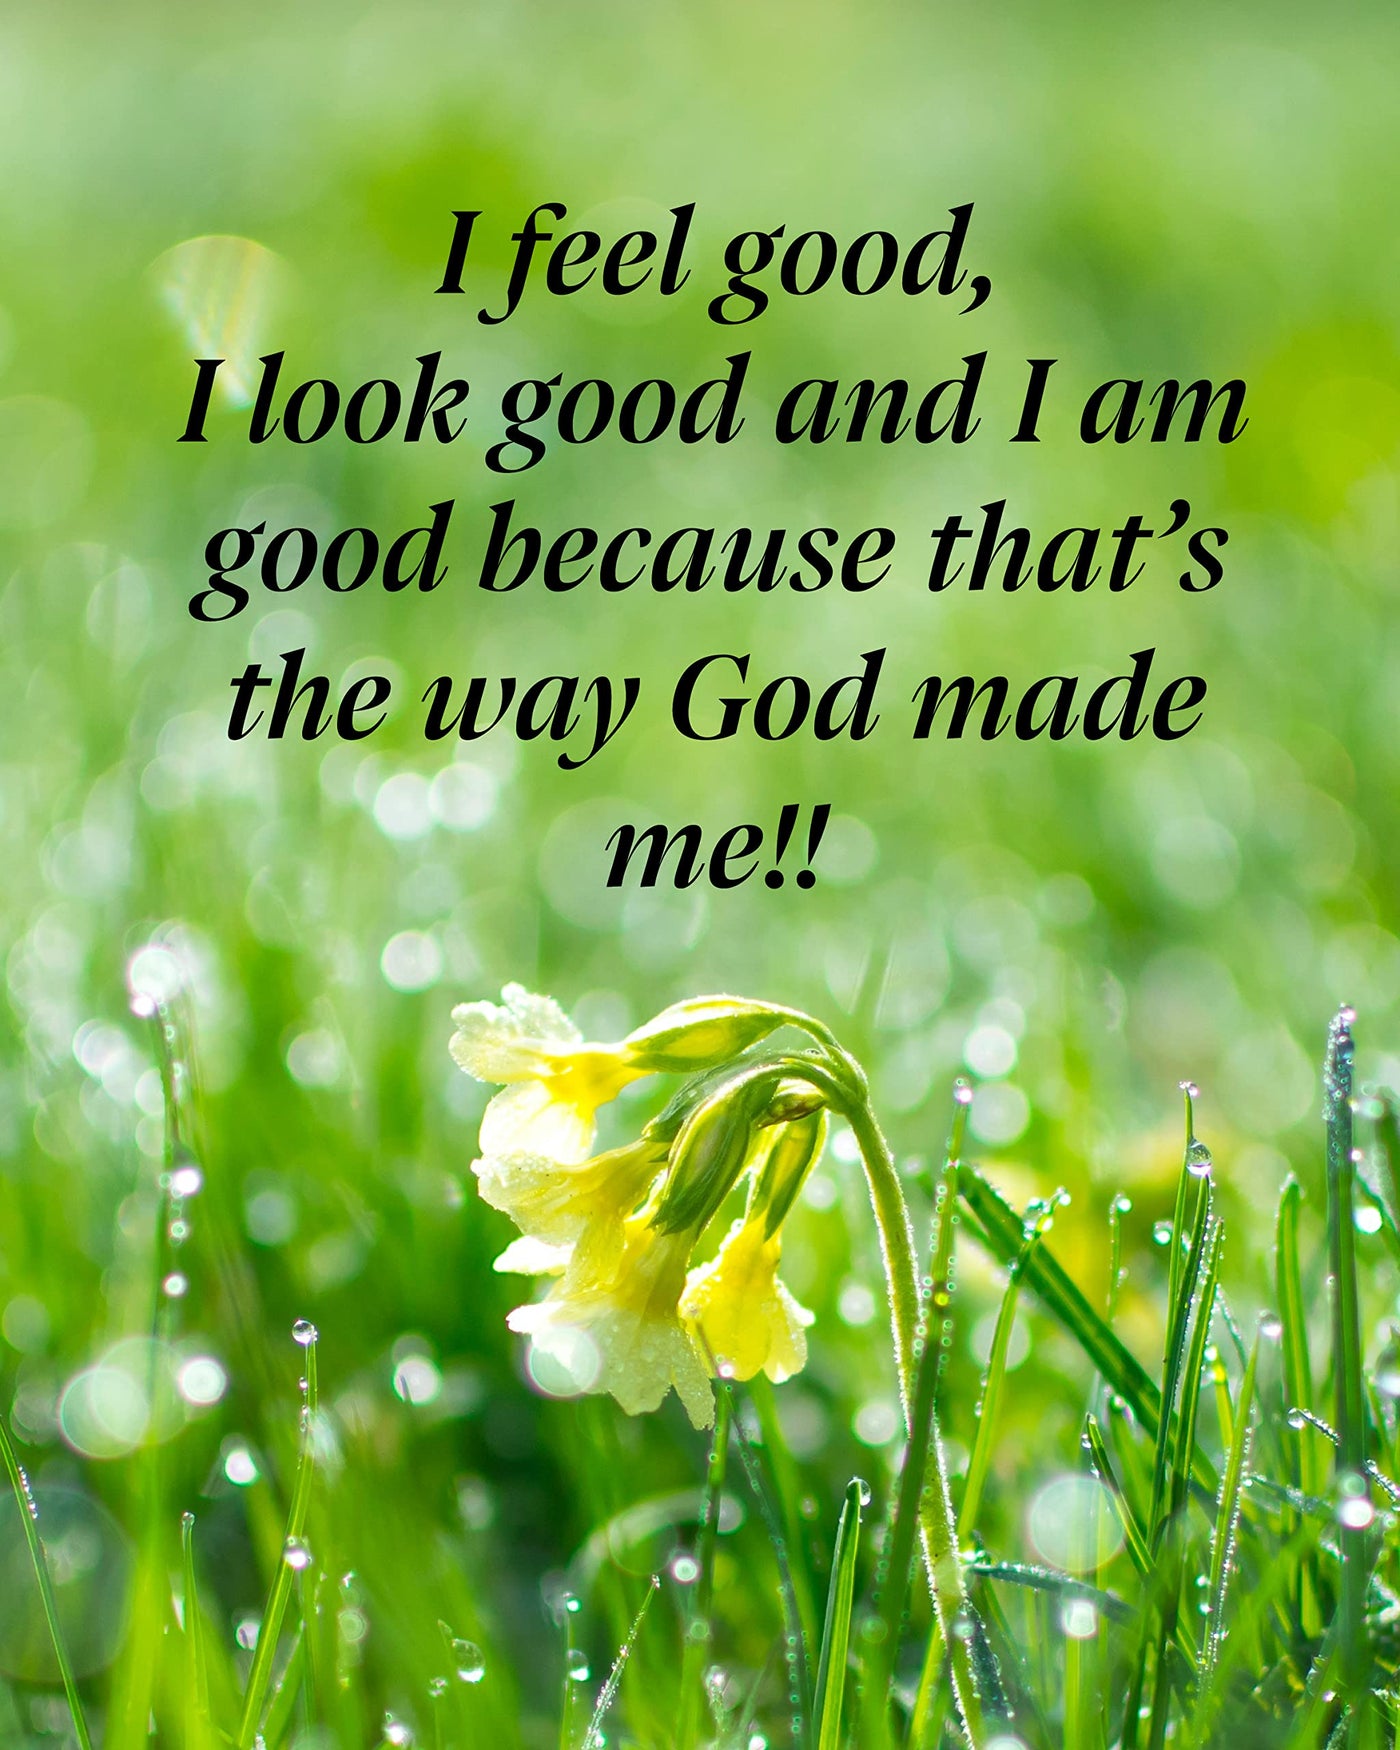 I Feel-Look Good-Way God Made Me Inspirational Christian Wall Art Decor -8 x 10" Flower in Grass Photo Print -Ready to Frame. Motivational Home-Office-Church-Religious Decor. Great Gift of Faith!